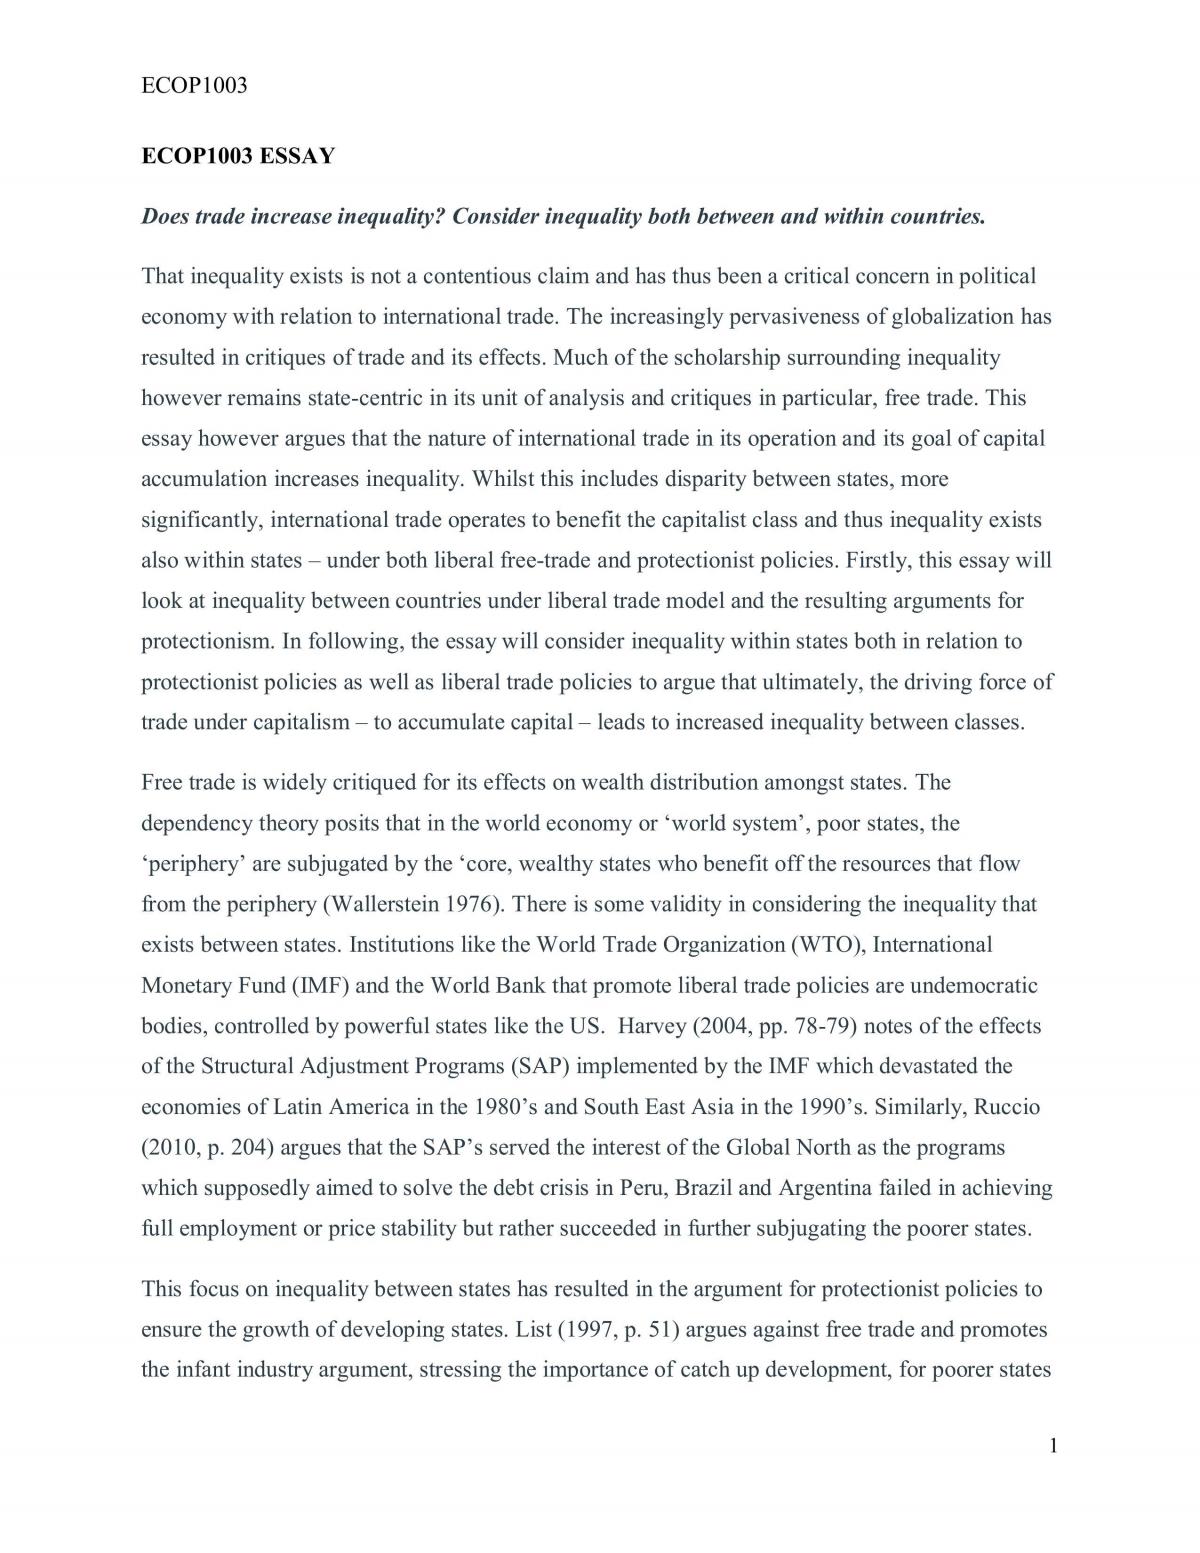 Essay on Trade Inequality  - Page 1